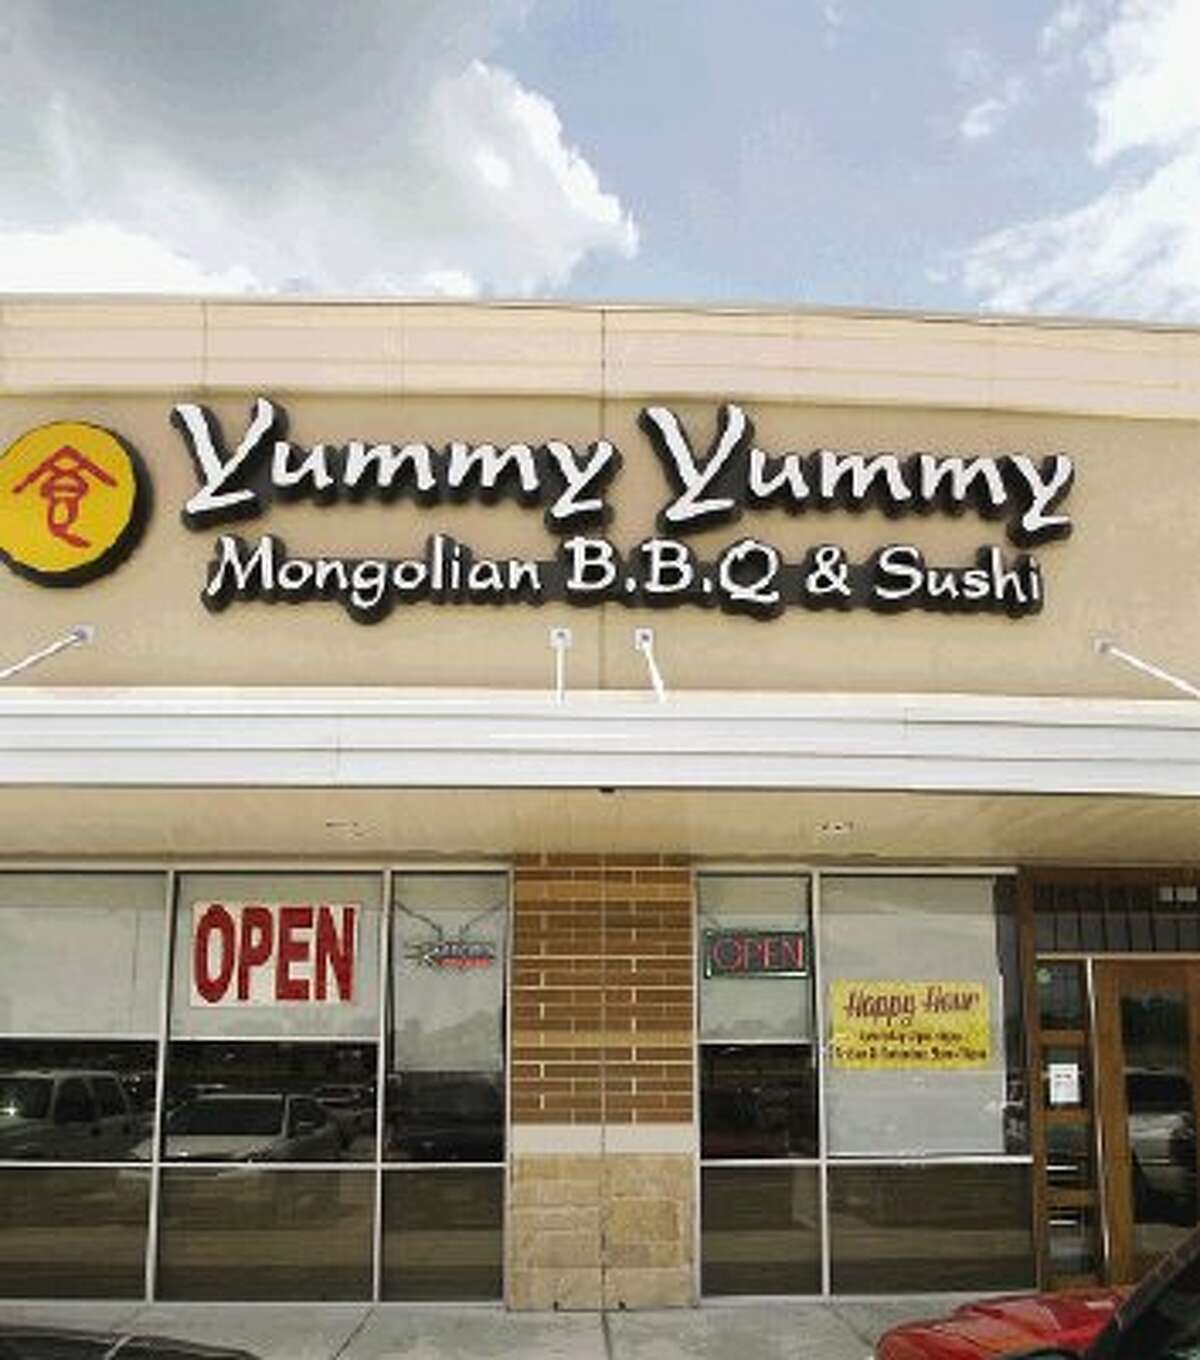 Yummy Yummy is located in the new Kroger mega-center in Willis.